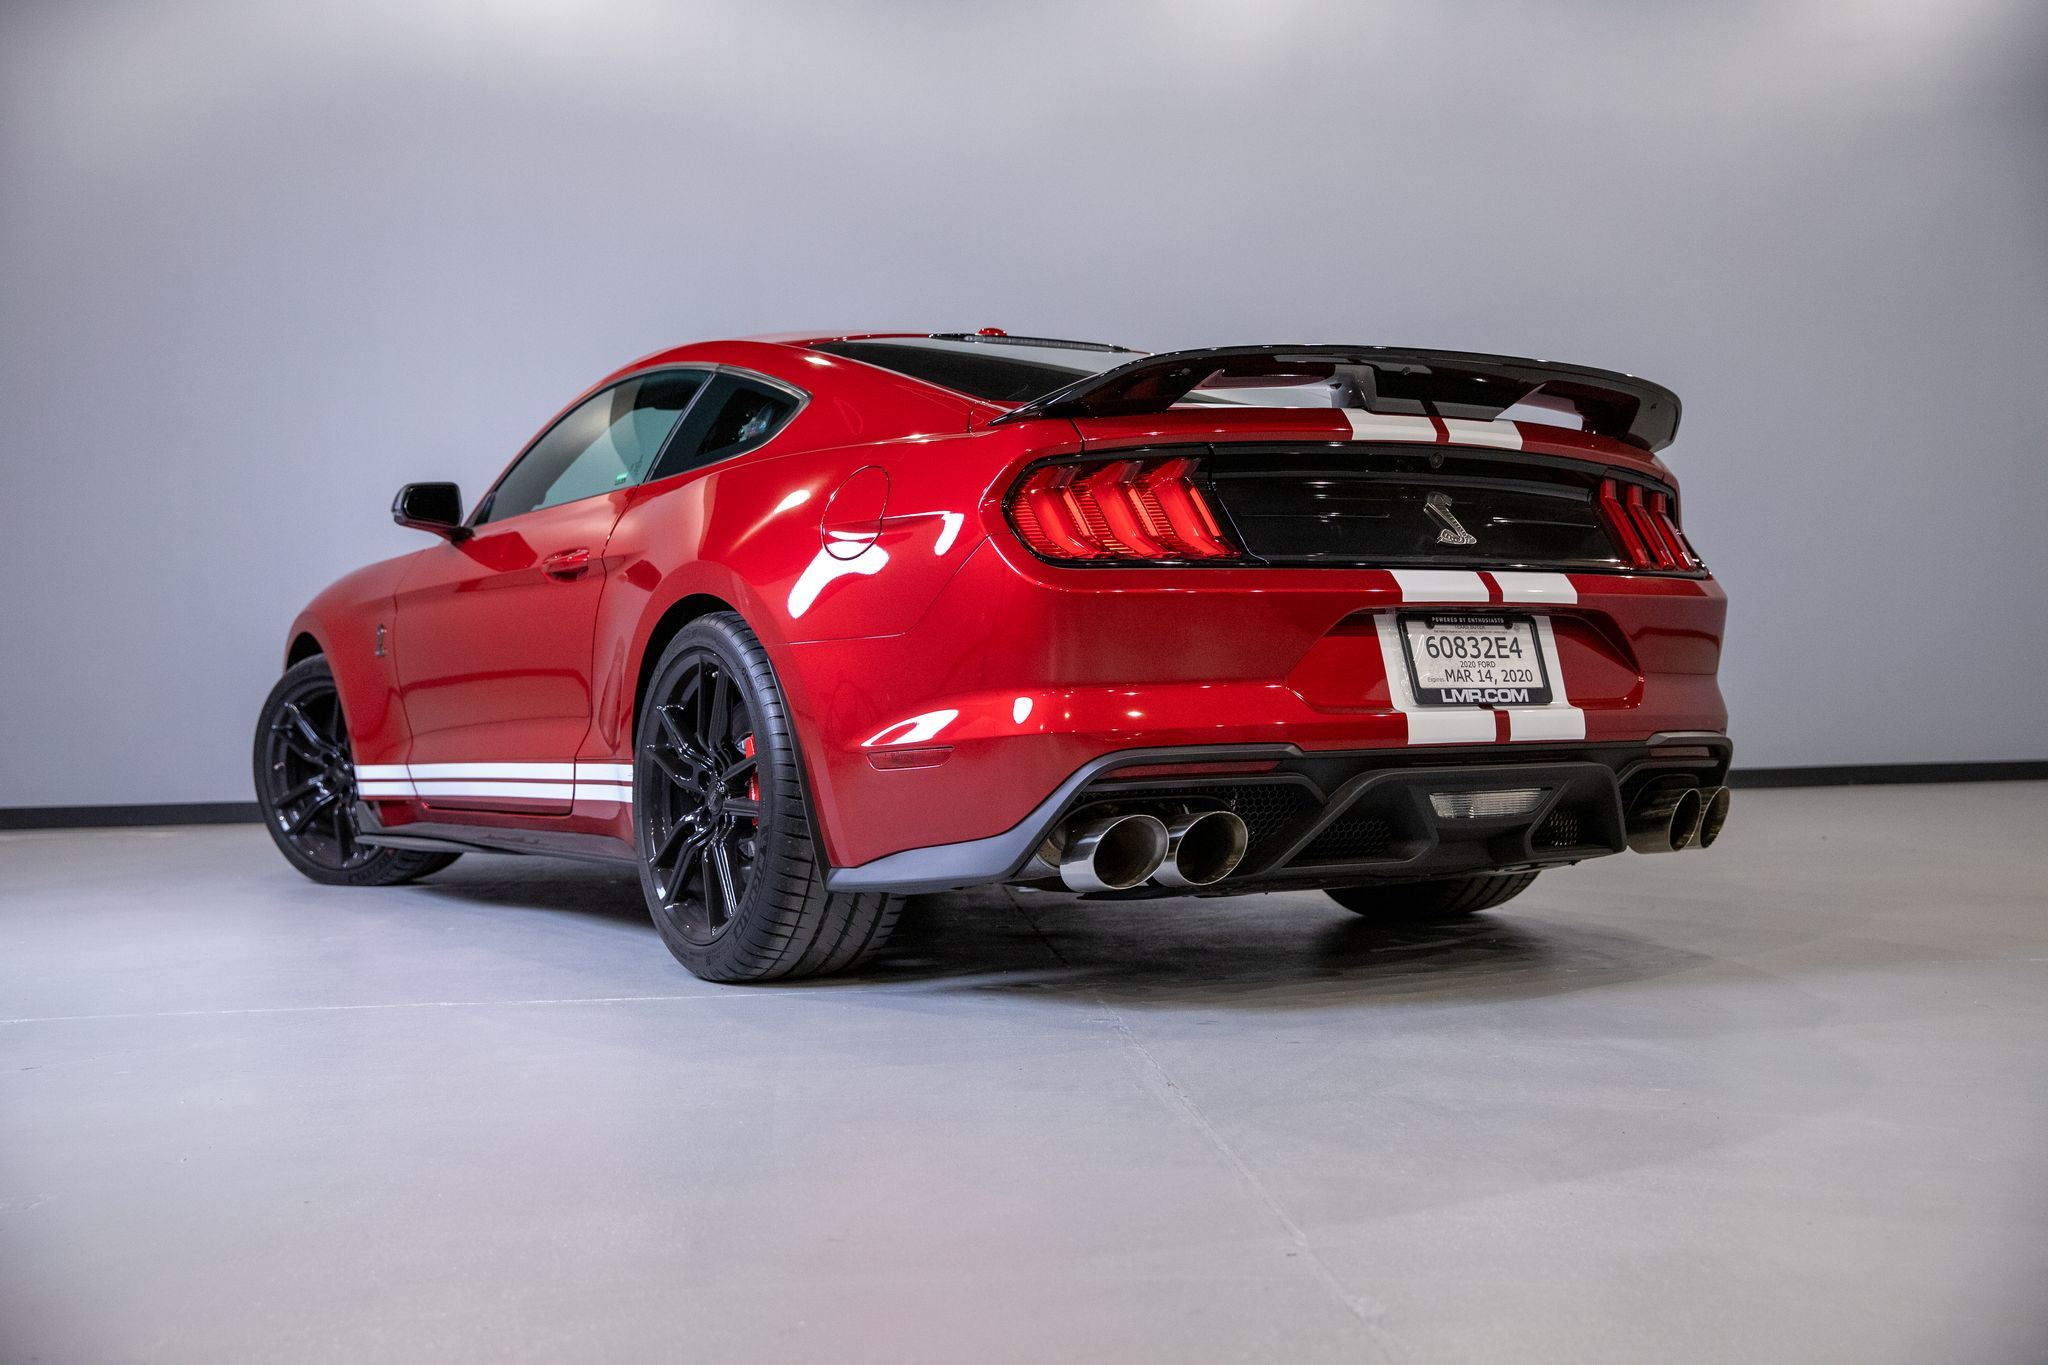 Everything You Need To Know About The 2020 Mustang GT500 - Everything You Need To Know About The 2020 Mustang GT500